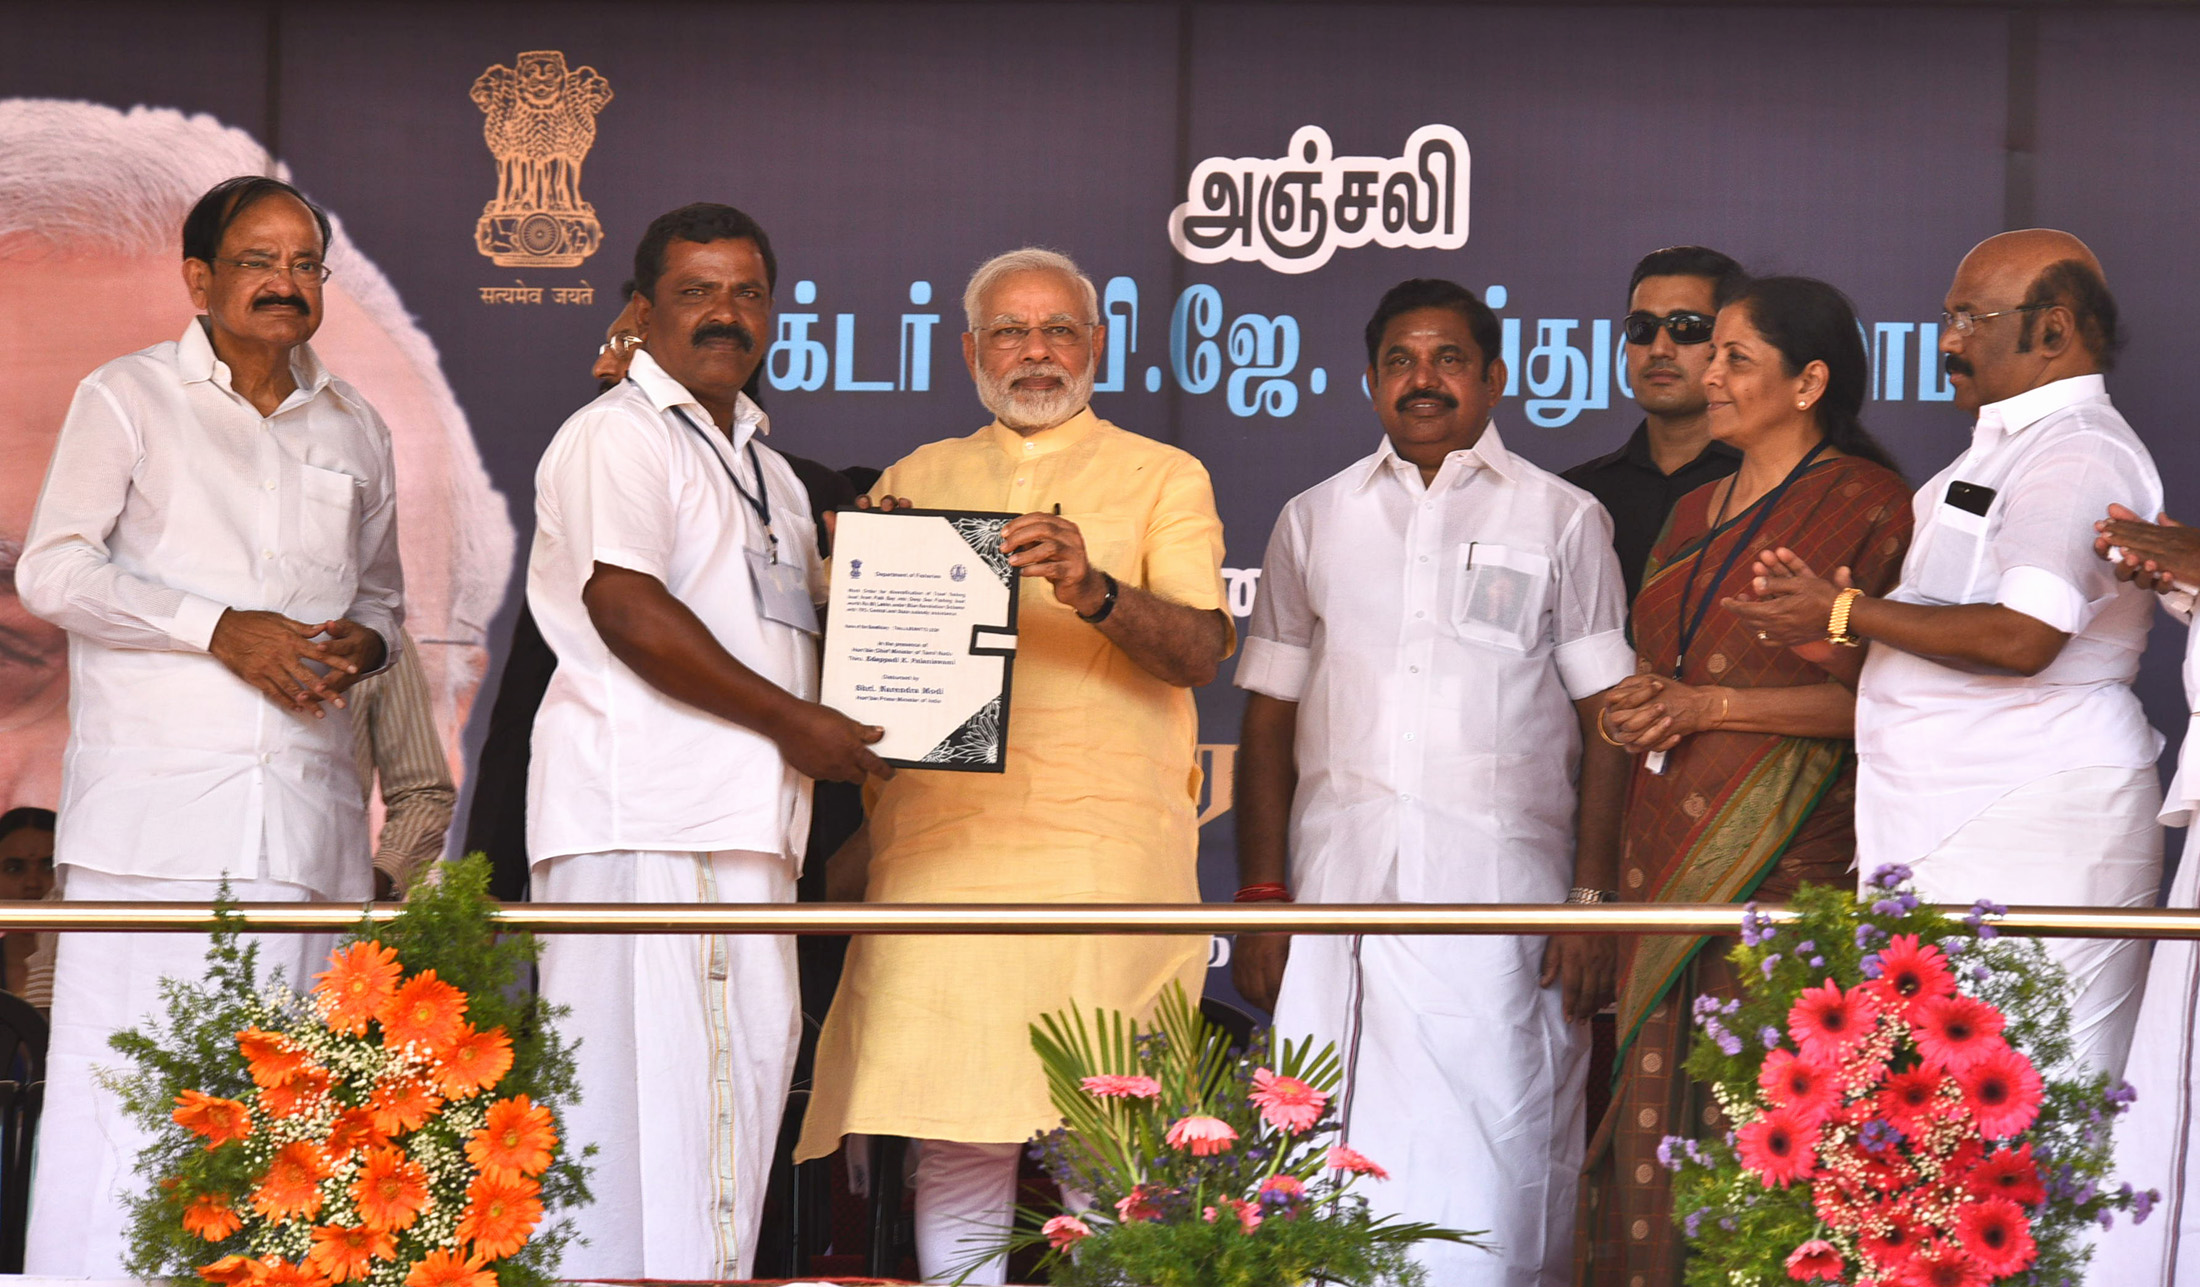 The Prime Minister, Shri Narendra Modi distributing the Sanction Letters to beneficiaries of Long Liner Trawlers under Blue Revolution Scheme, at Rameswaram, Tamil Nadu on July 27, 2017. The Chief Minister of Tamil Nadu, Shri Edappadi K. Palaniswami, the Minister of State for Commerce & Industry (Independent Charge), Smt. Nirmala Sitharaman and other dignitaries are also seen.